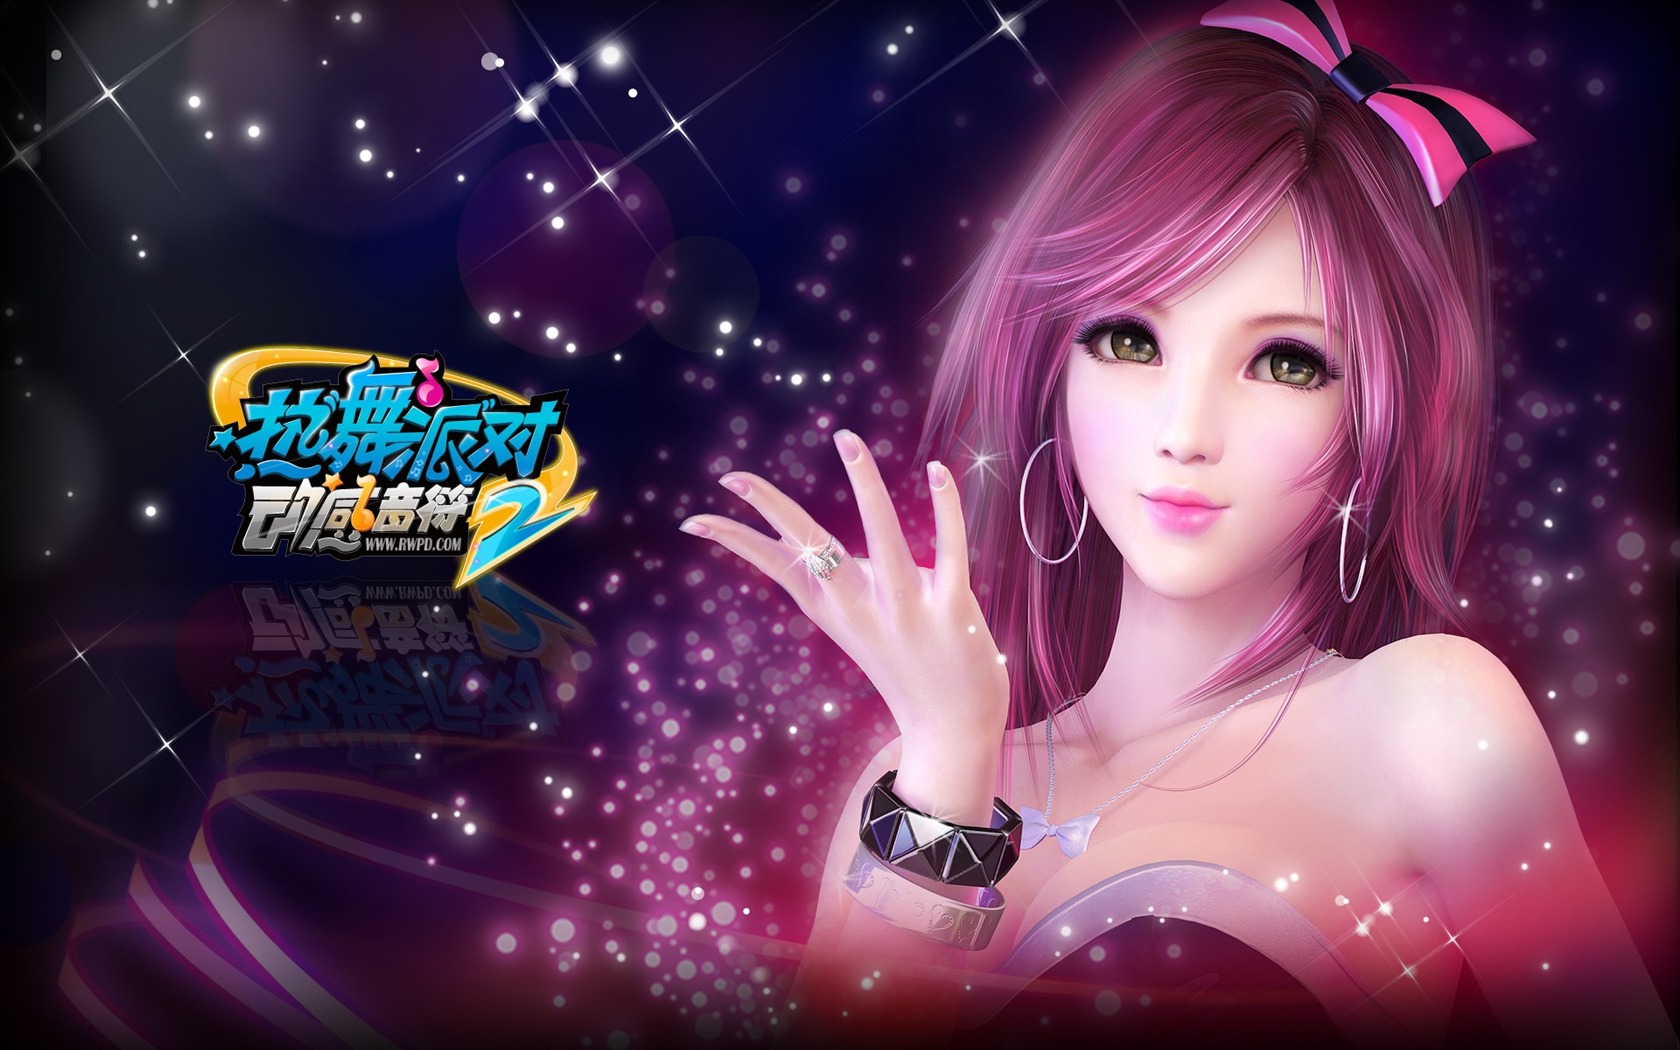 Online game Hot Dance Party II official wallpapers #26 - 1680x1050